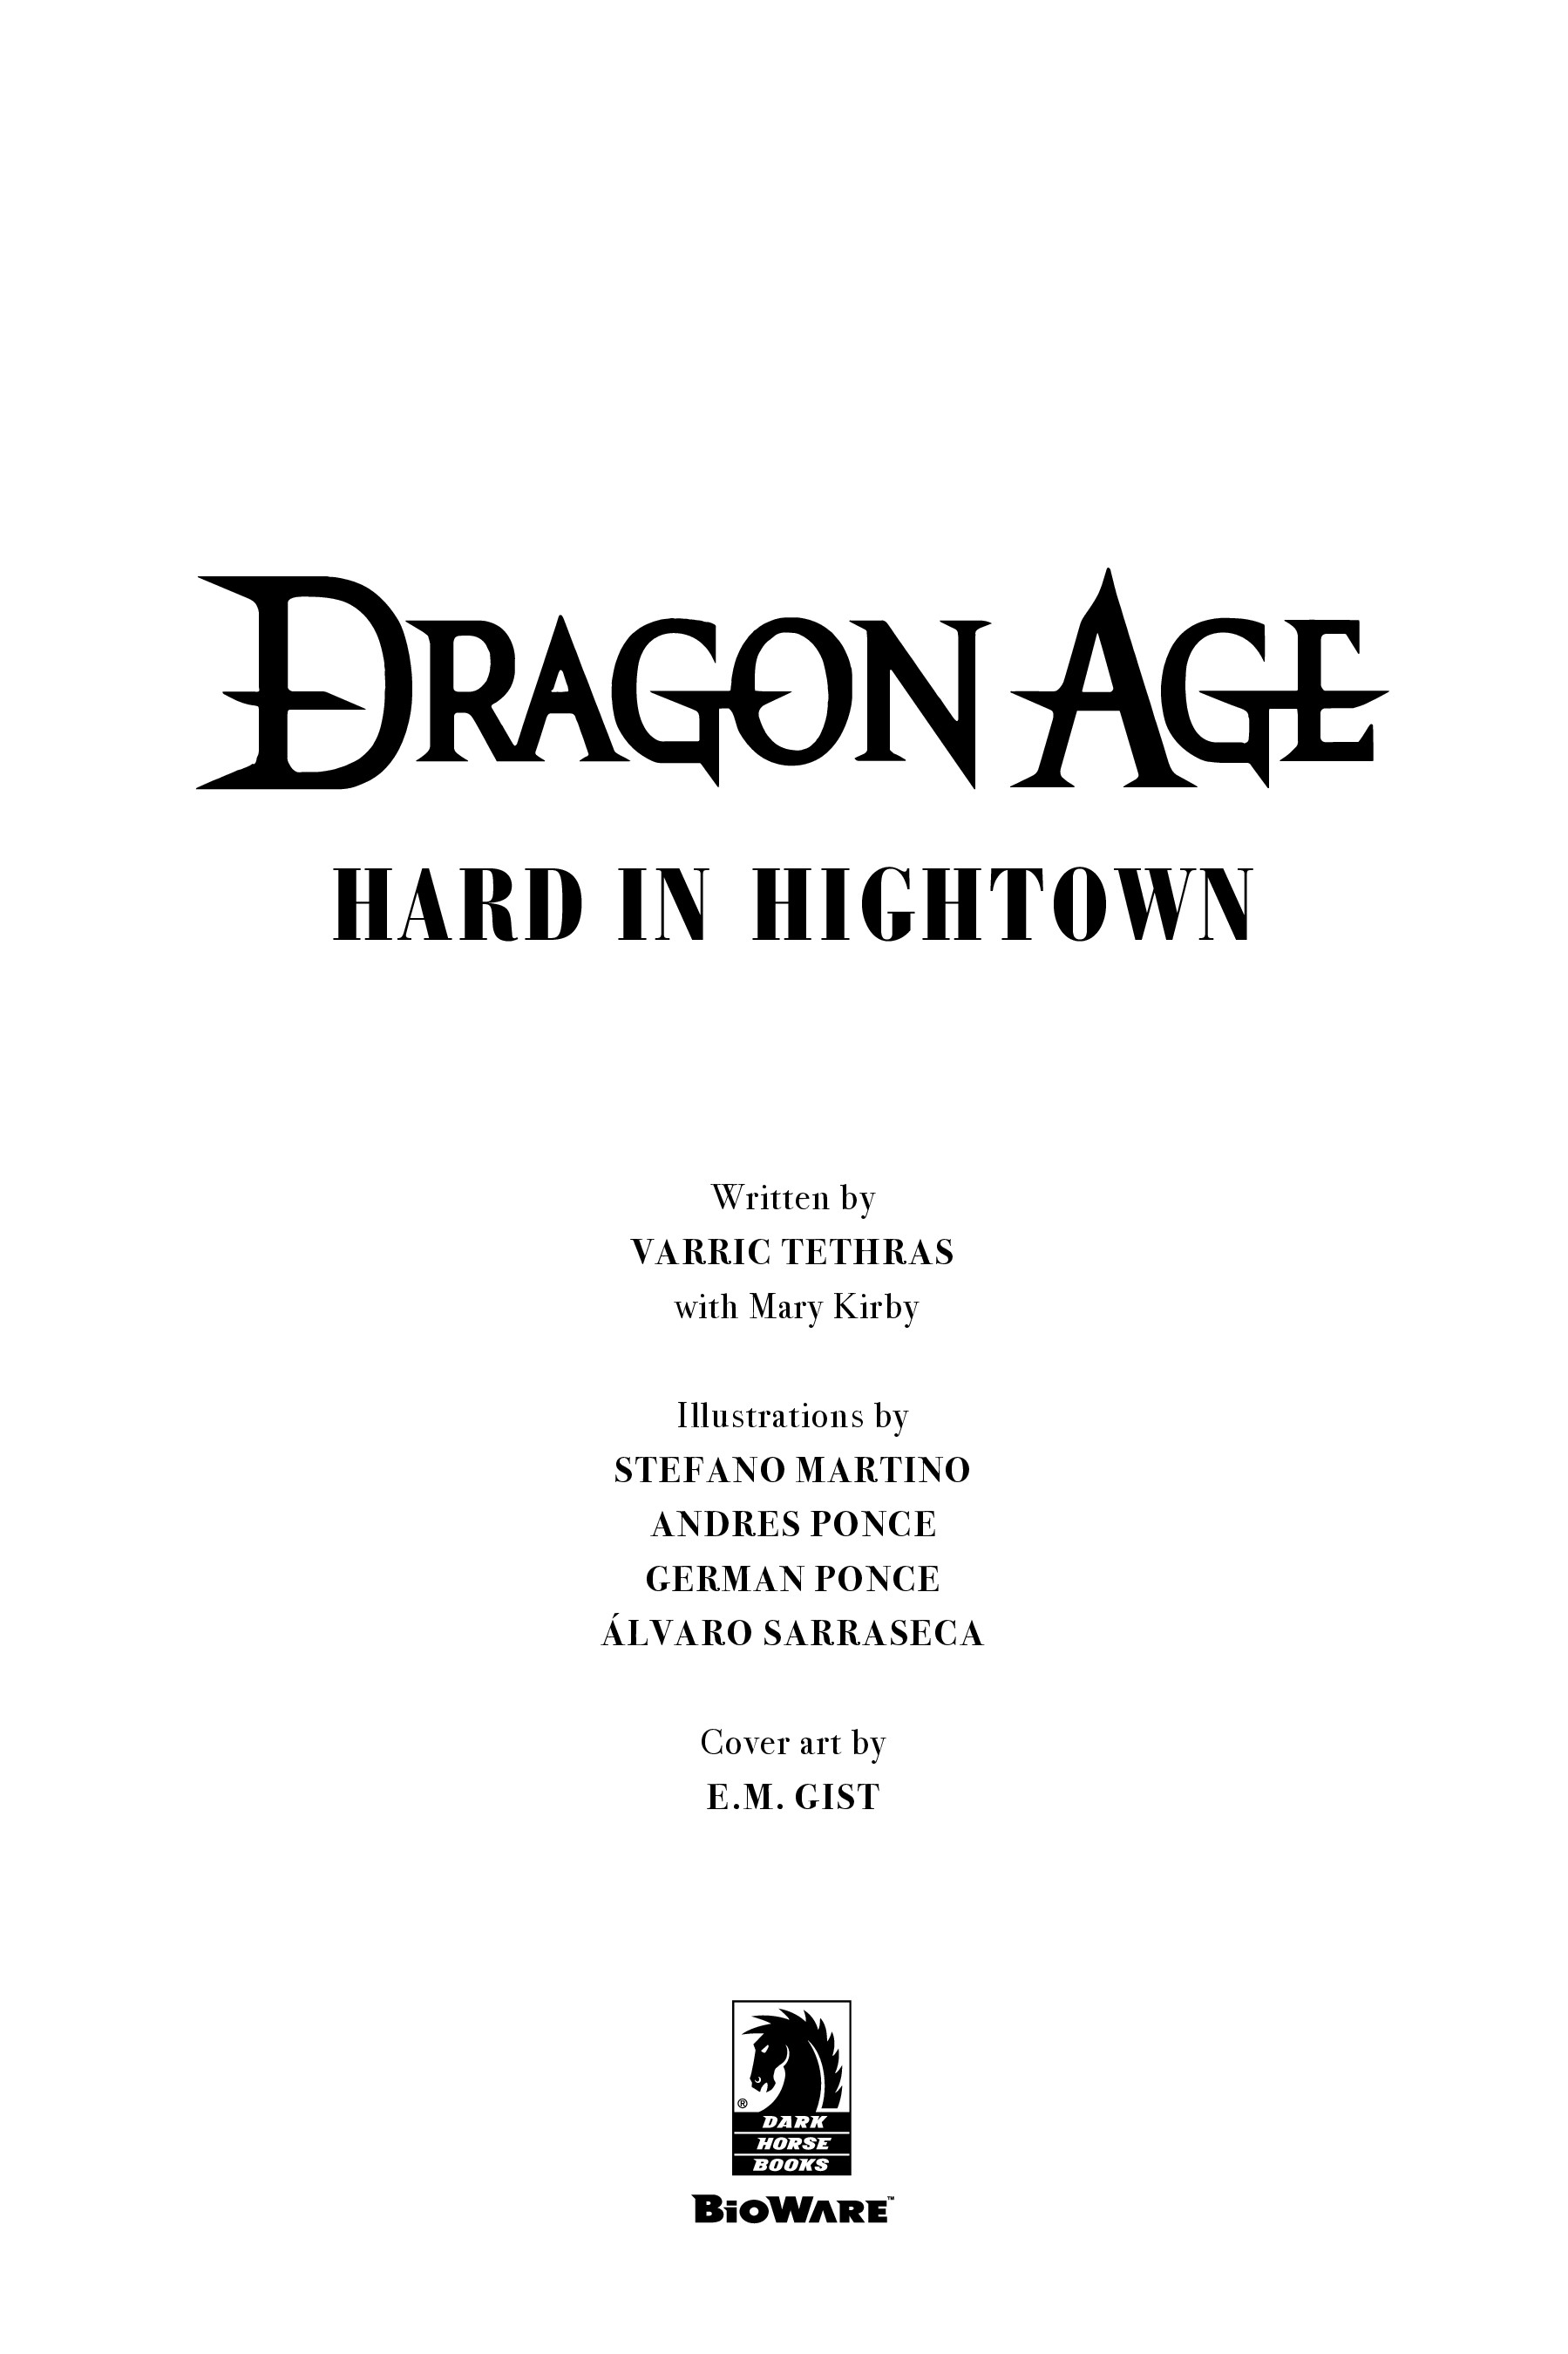 Read online Dragon Age: Hard in Hightown comic -  Issue # TPB - 4